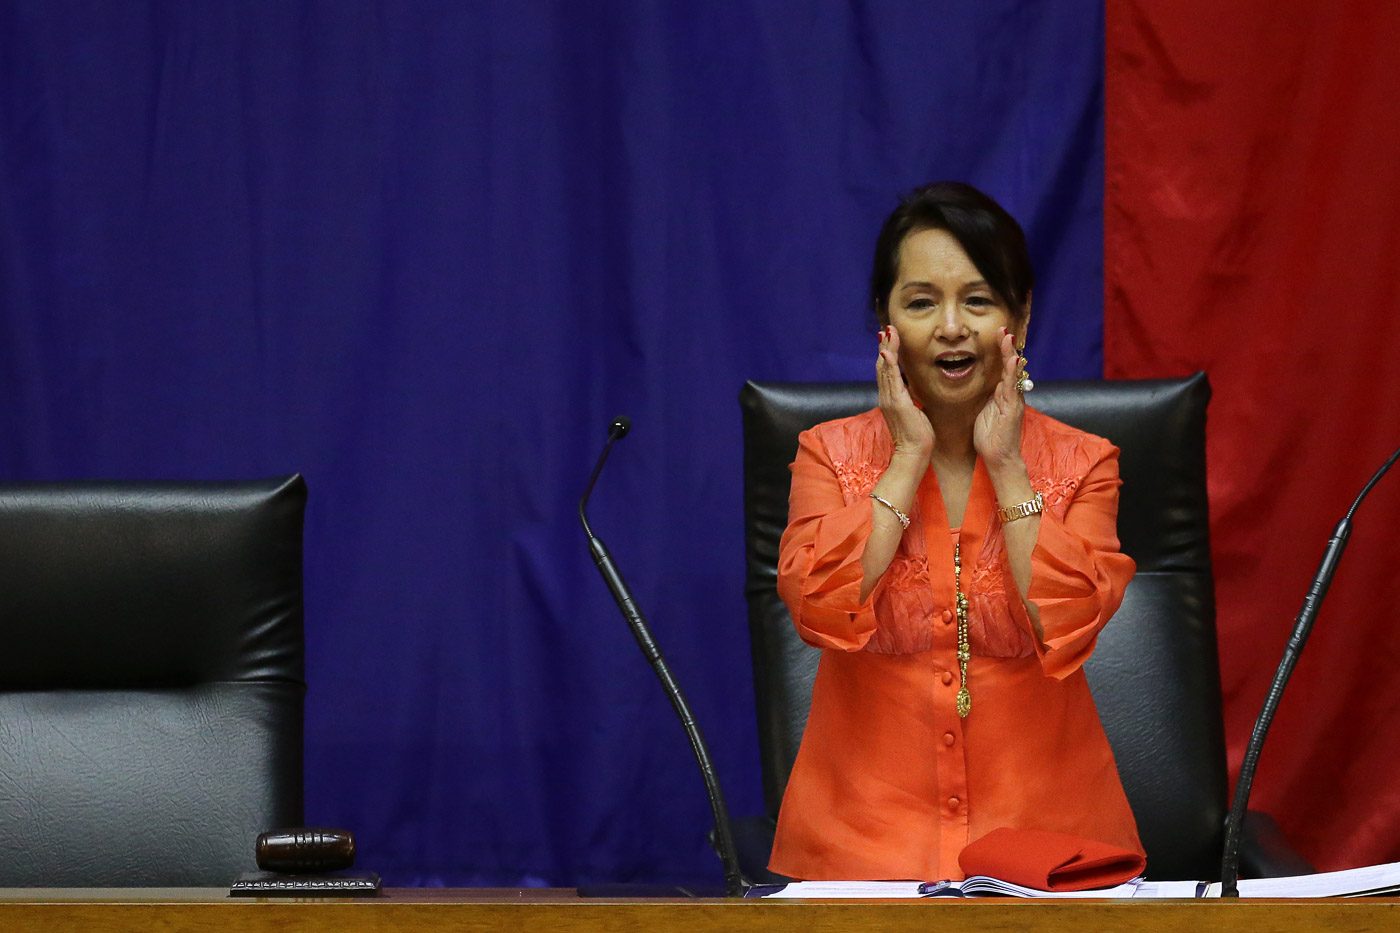 QUEEN OF THEM ALL. Speaker Gloria Macapagal Arroyo cups her hands to address the lawmakers who installed her as the new House Speaker. The microphones were turned off during the coup. Photo by Ben Nabong/Rappler   